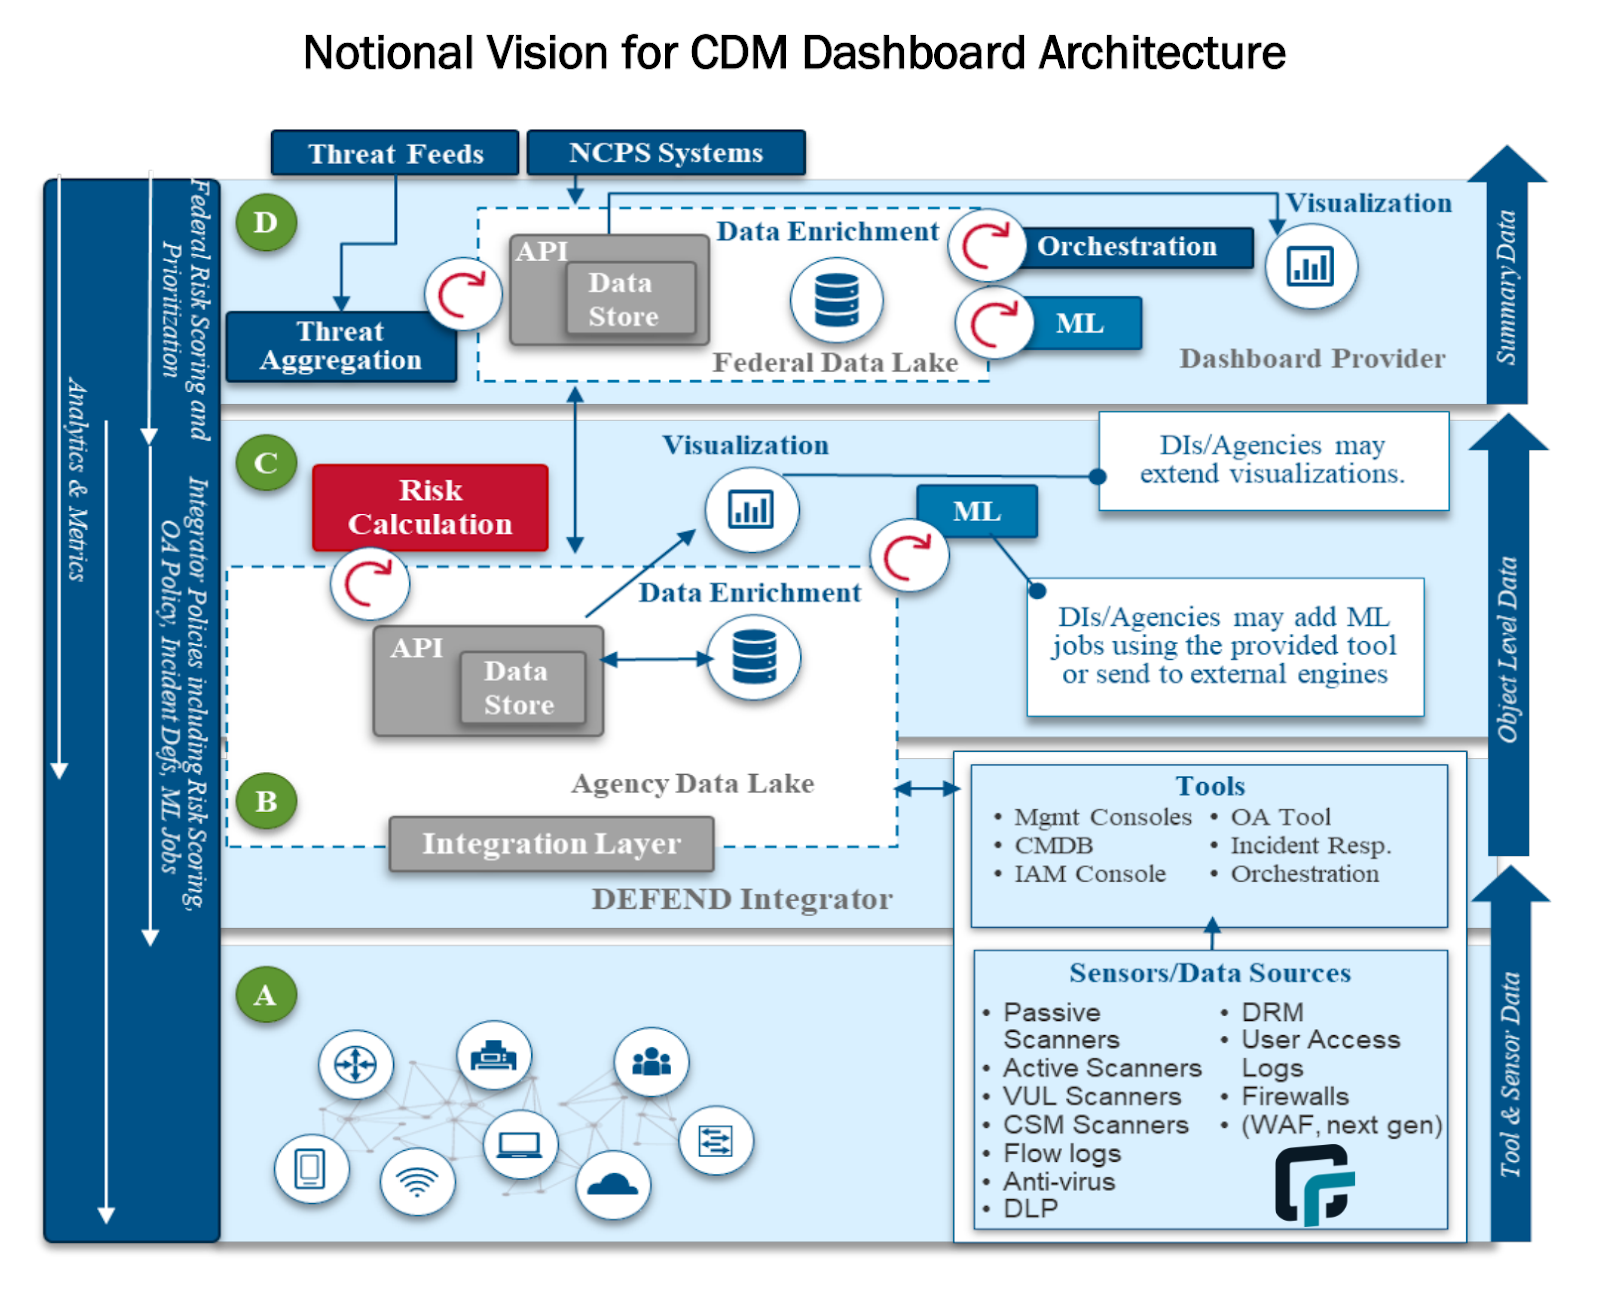 runZero fits into the government CDM dashboard under data sources and tools